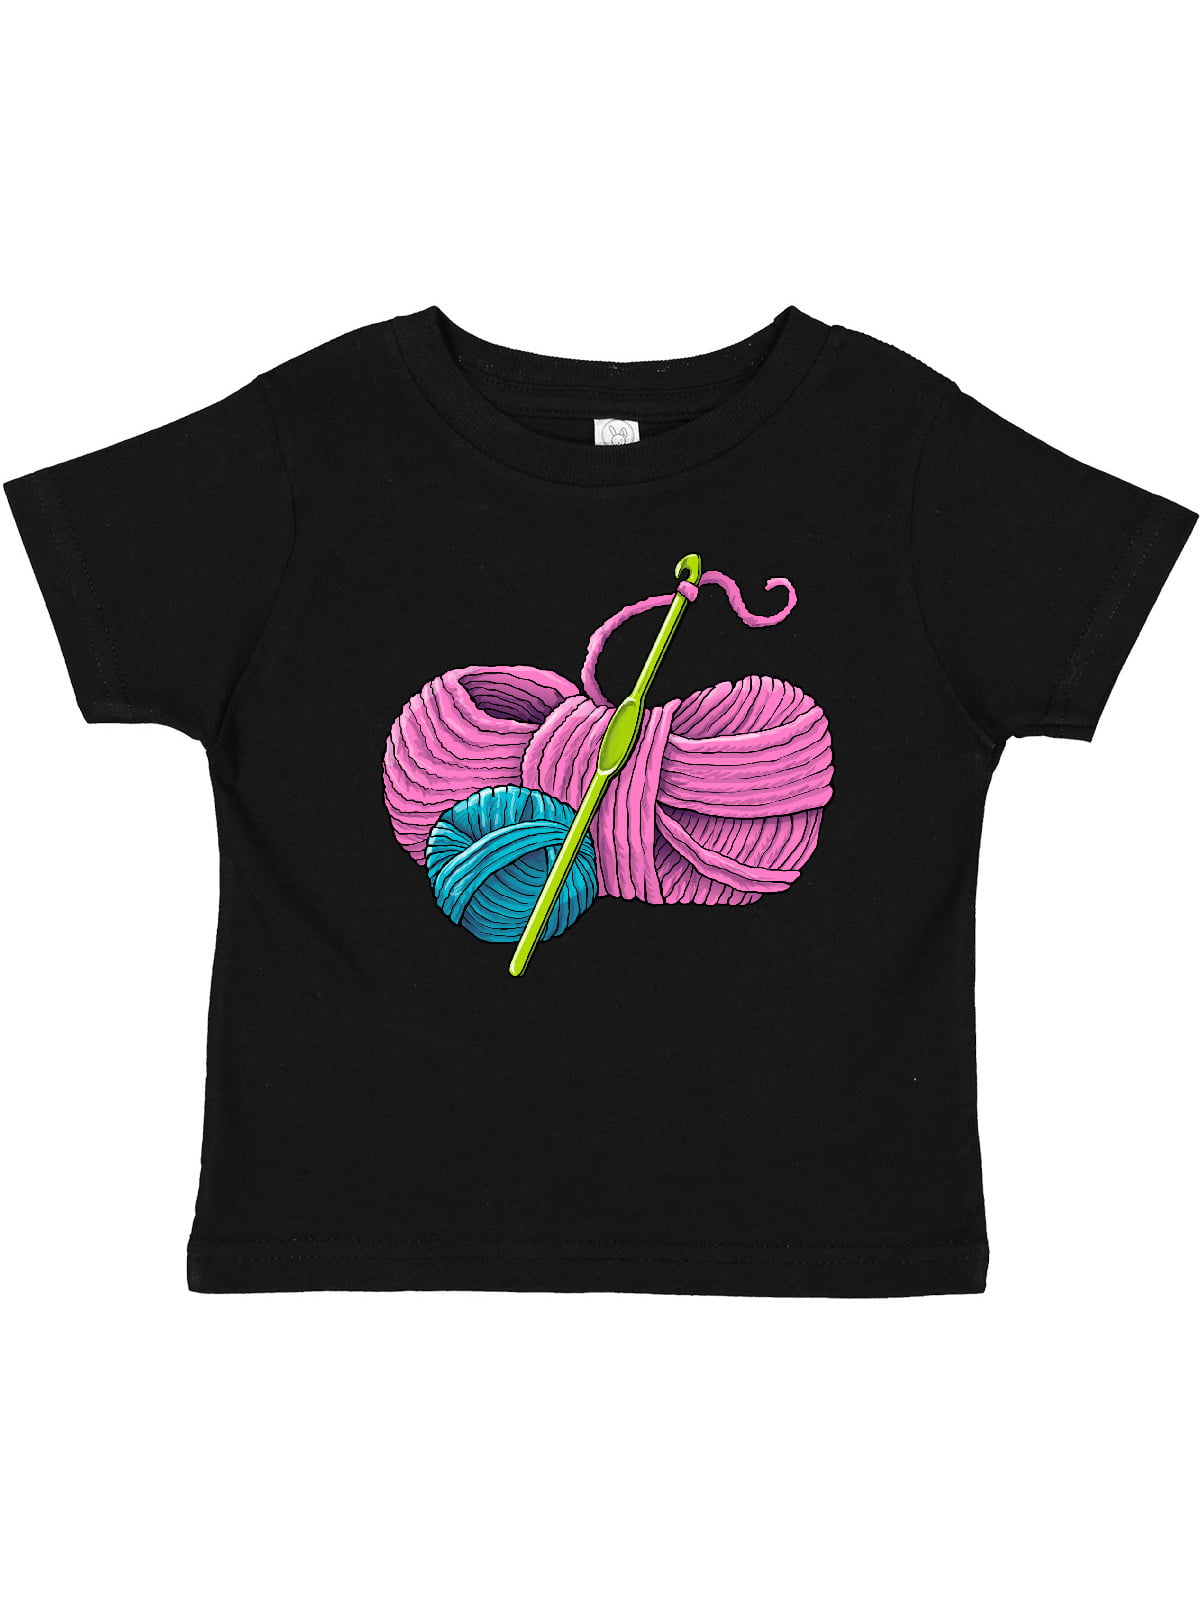 Inktastic Blue and Pink Yarn with Crochet Hook Boys or Girls Baby T-Shirt